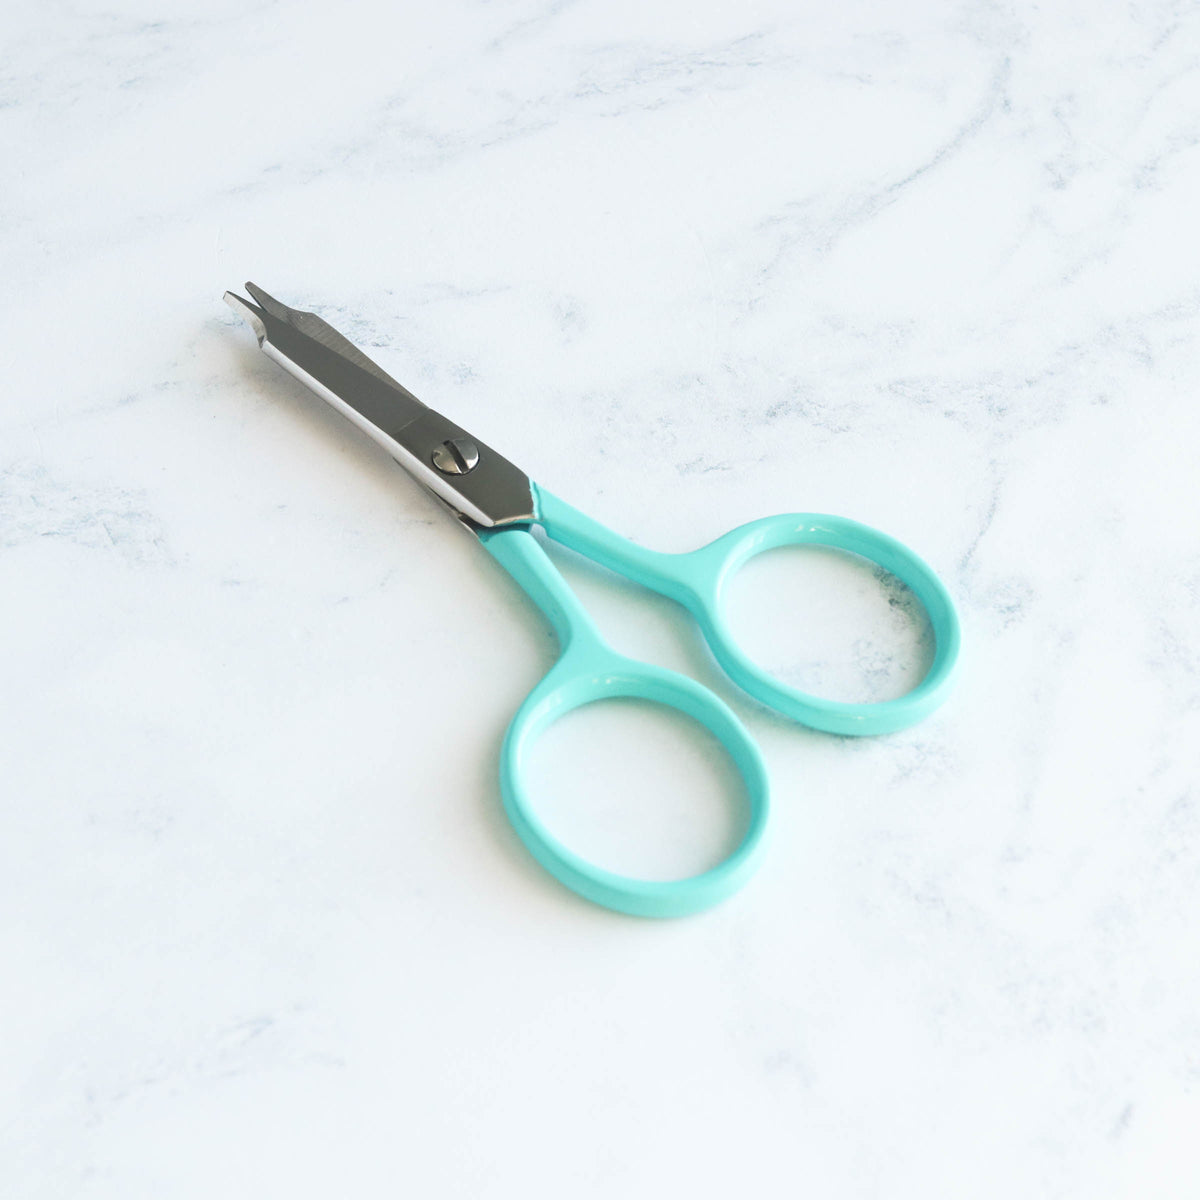 Special Edition Micro Tip Embroidery Scissors